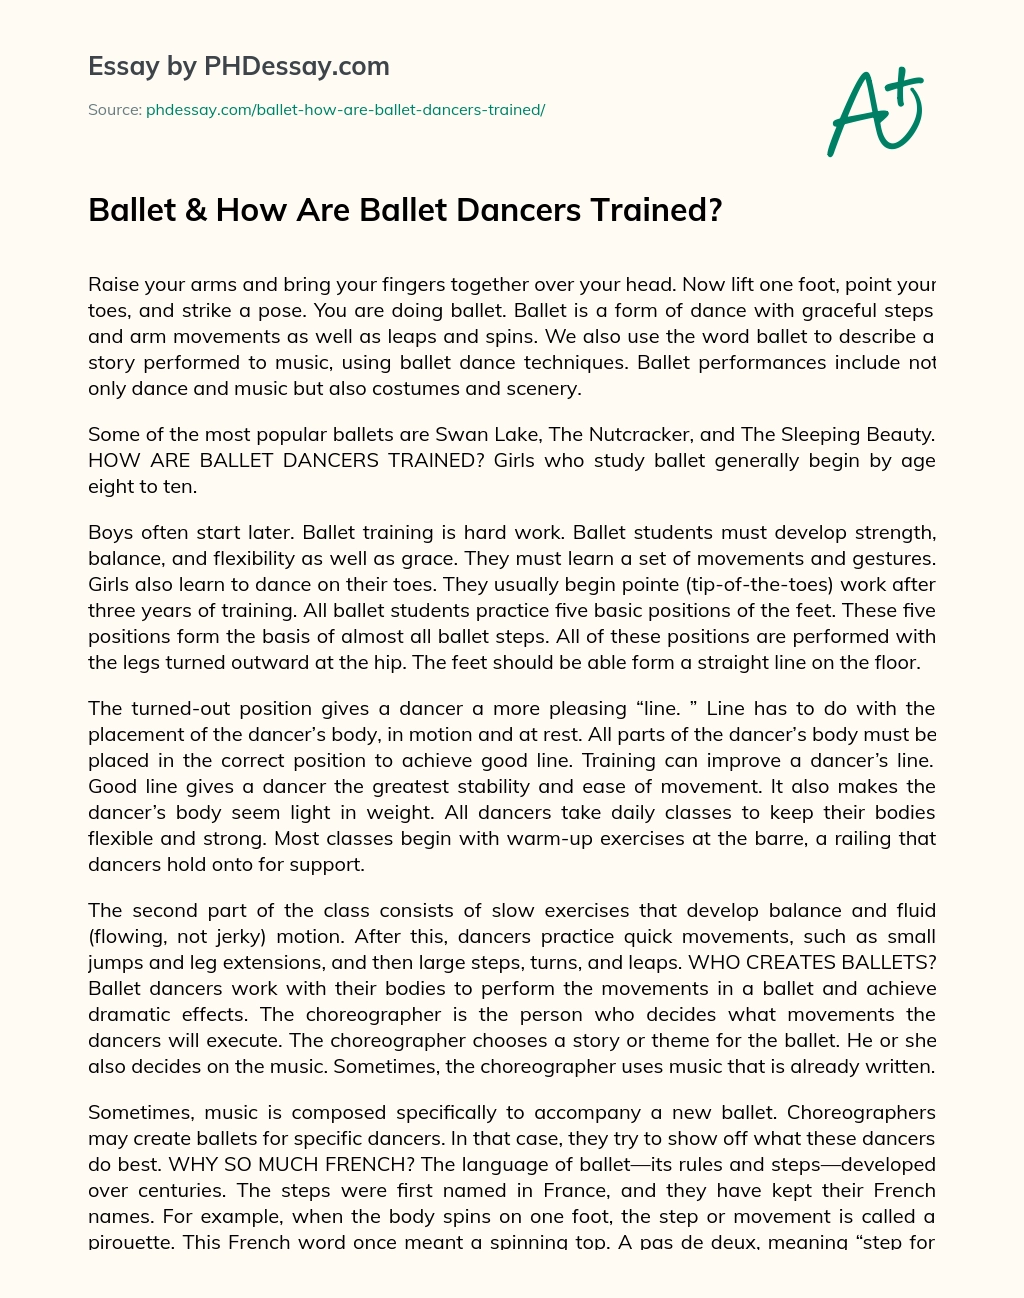 Ballet & How Are Ballet Dancers Trained? essay